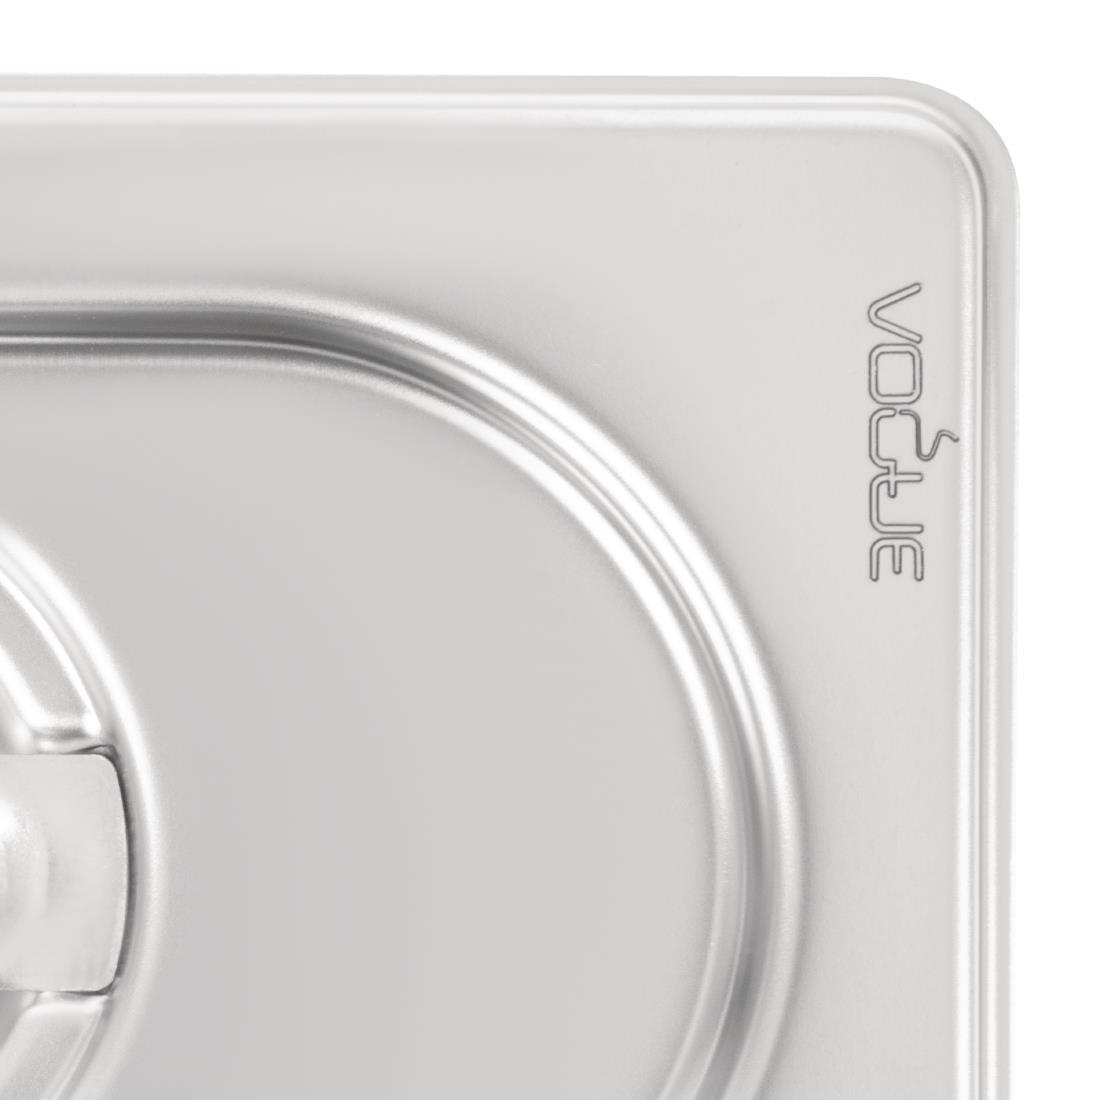 Vogue Heavy Duty Stainless Steel 1/9 Gastronorm Pan Lid - DW460  - 6